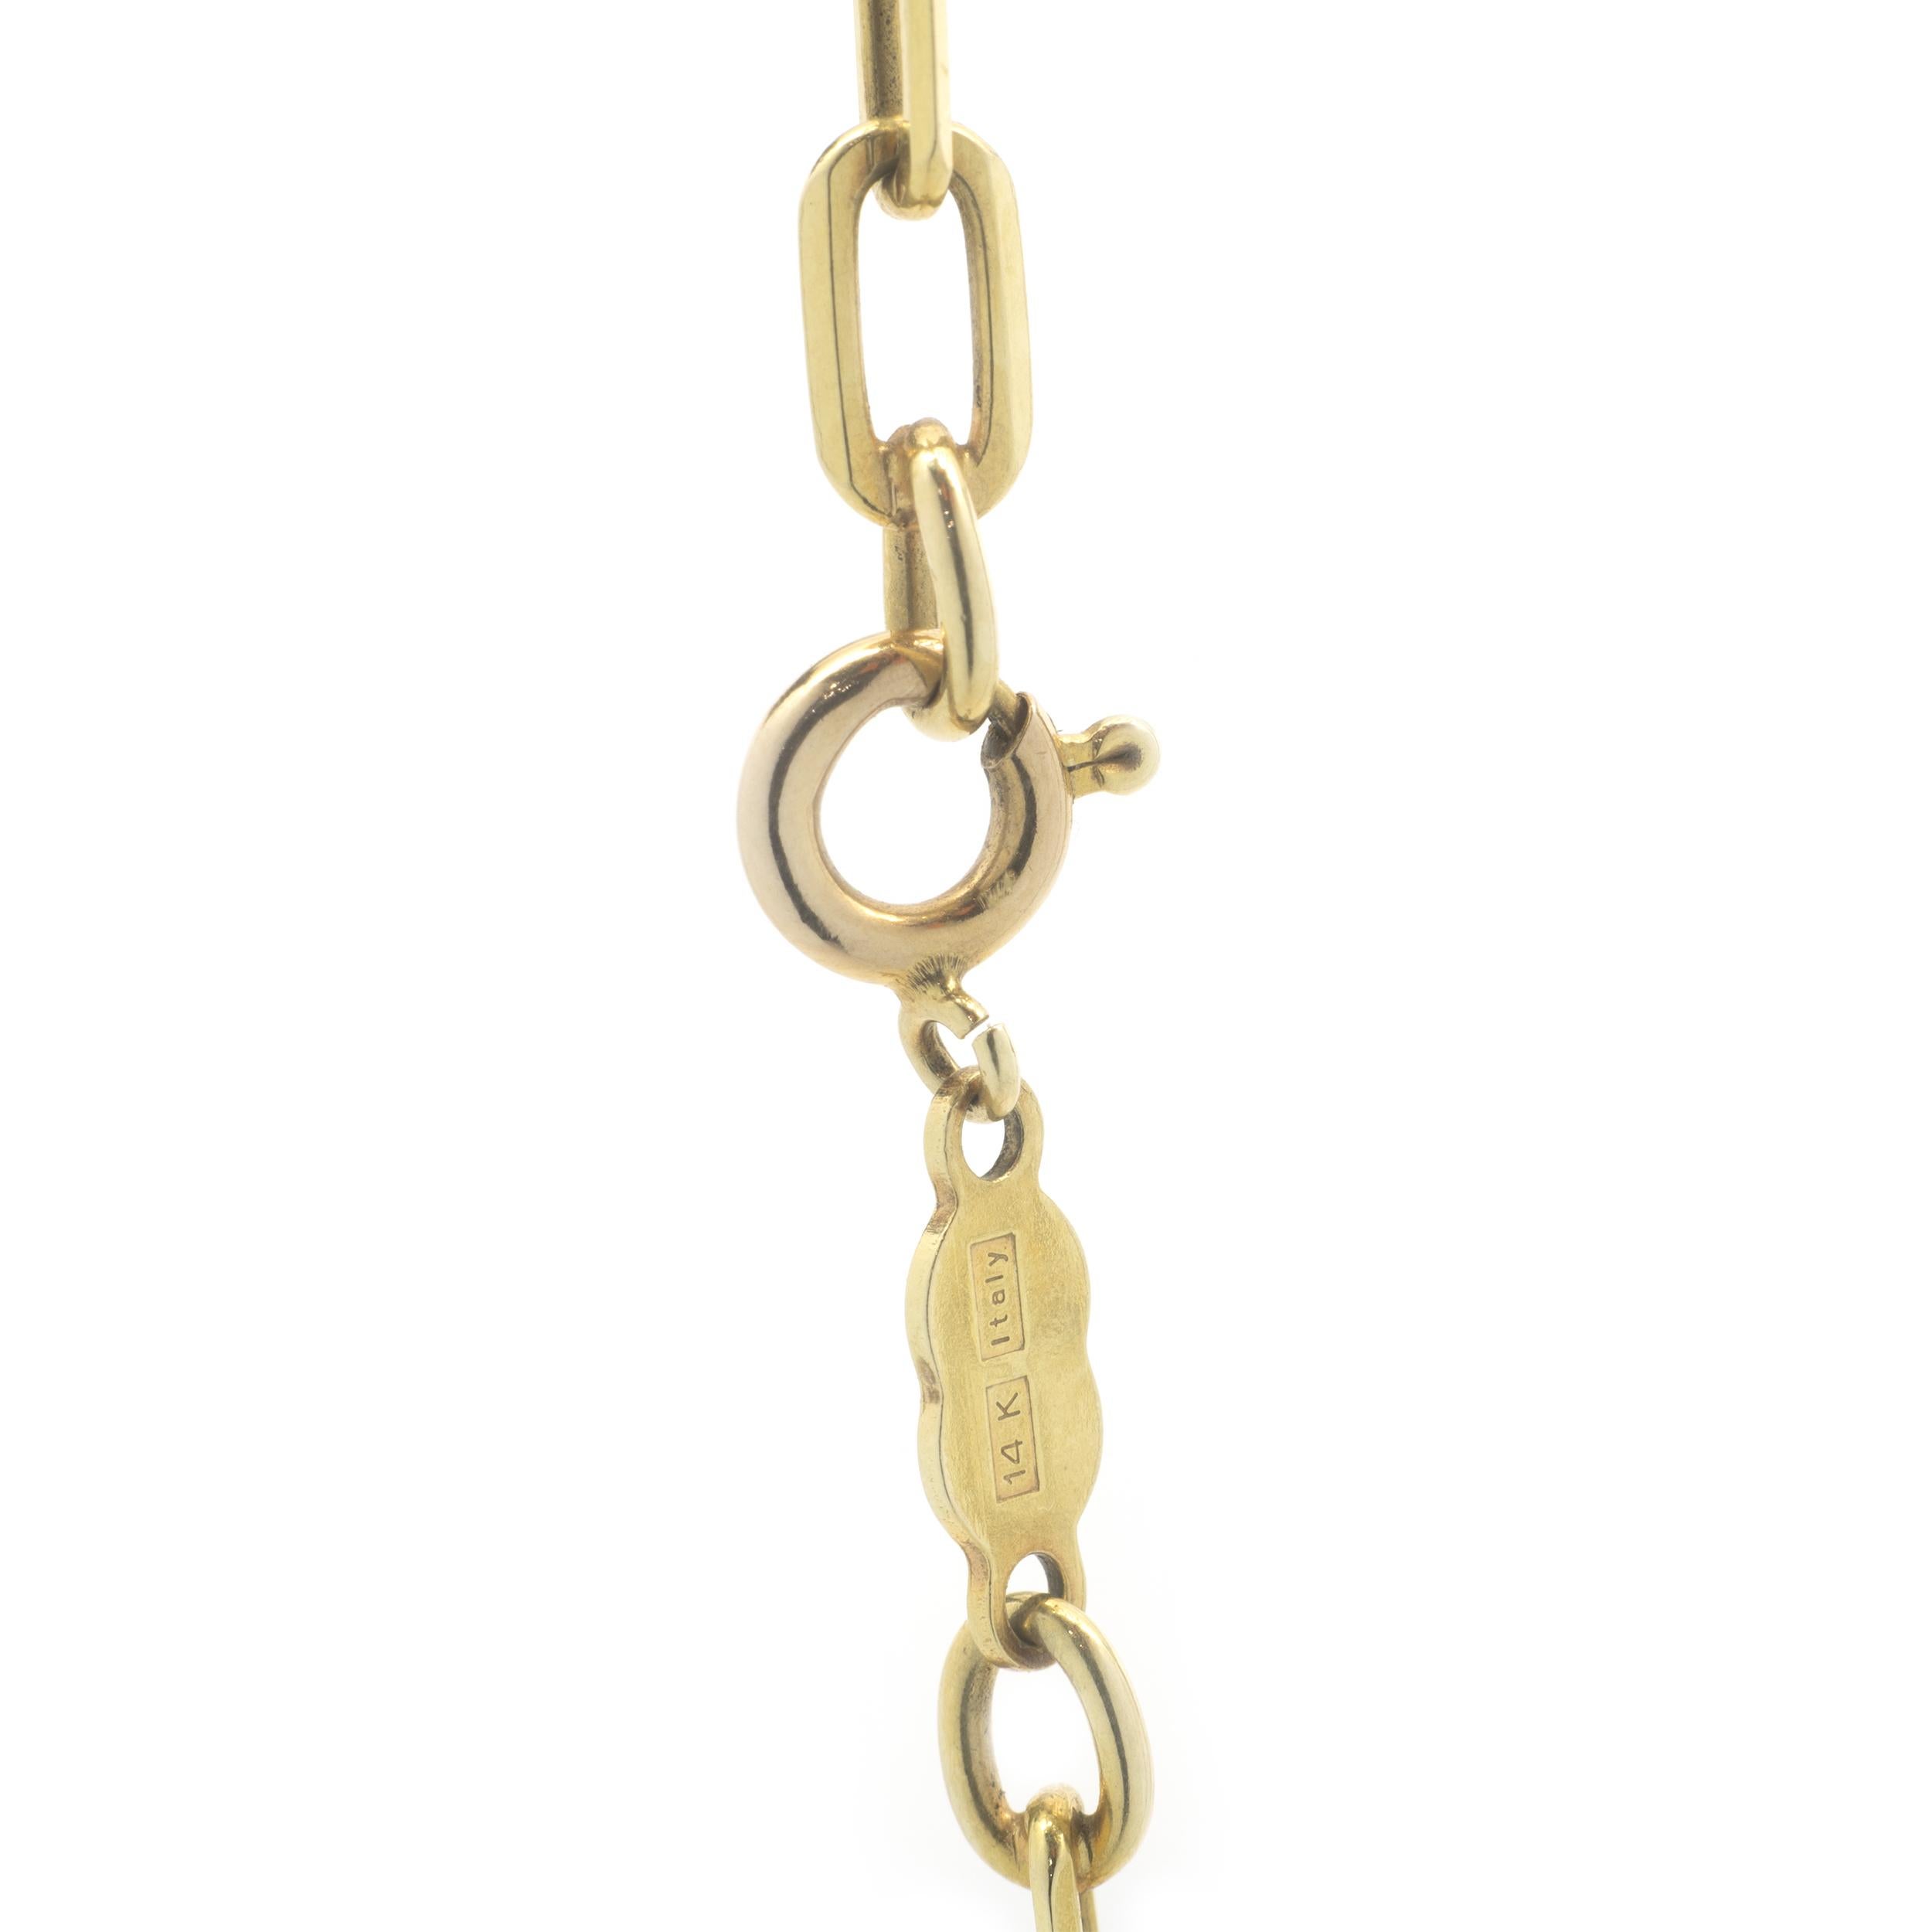 Material: 14k yellow gold
Dimensions: necklace is 20-inches long and measures 4mm in width
Weight: 14.5 grams
